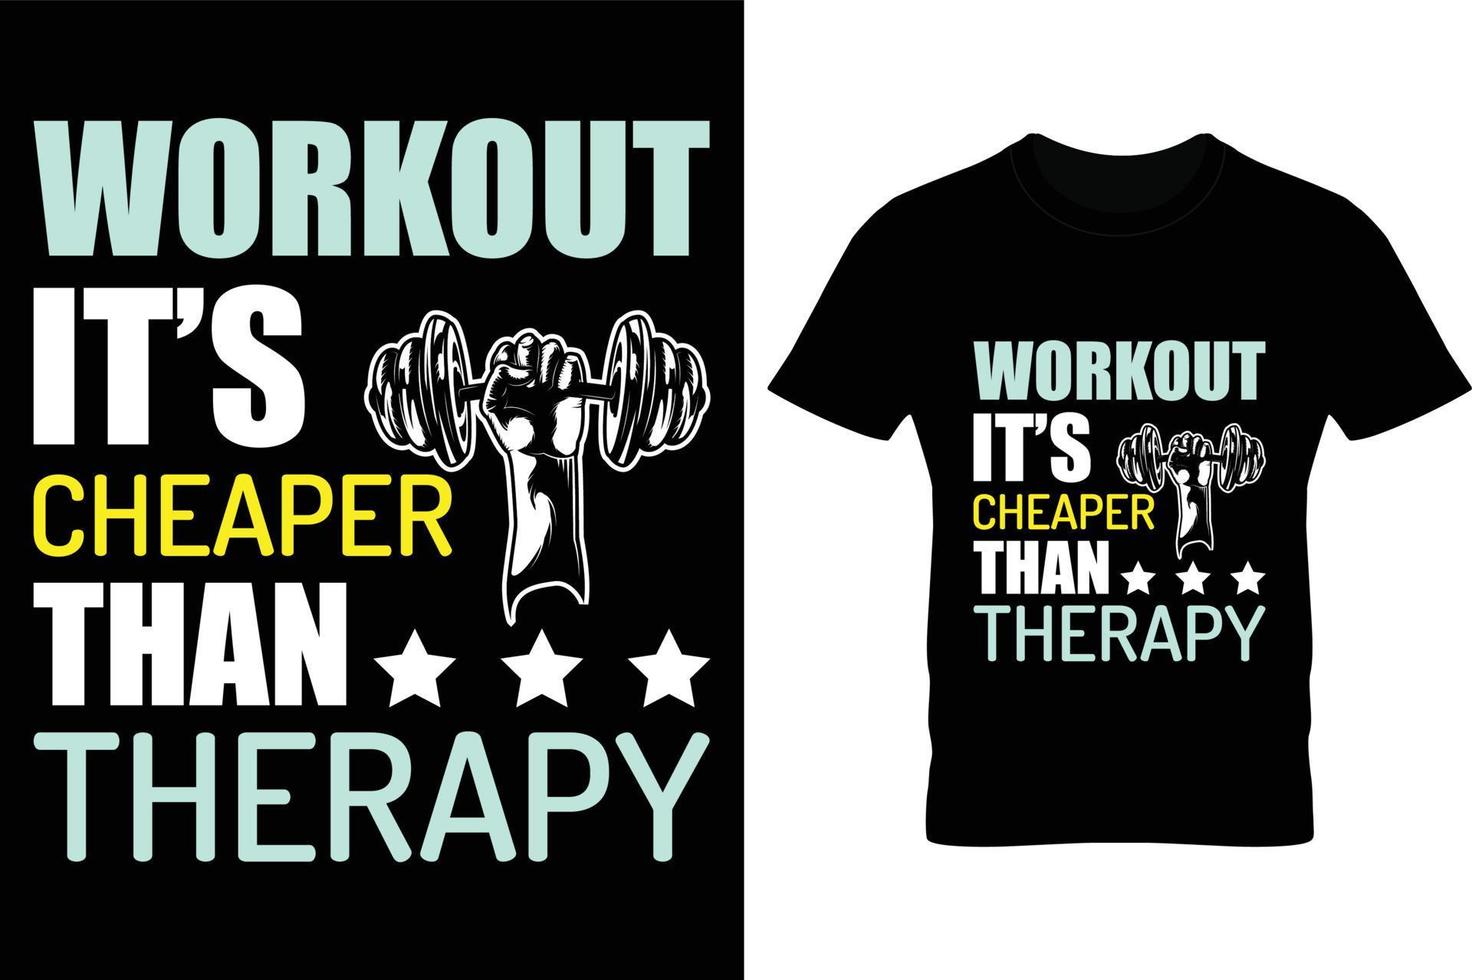 Workout it's cheaper than therapy gym t shirt vector graphic. Gym, Fitness, T shirt, Dumbbell, Vector.